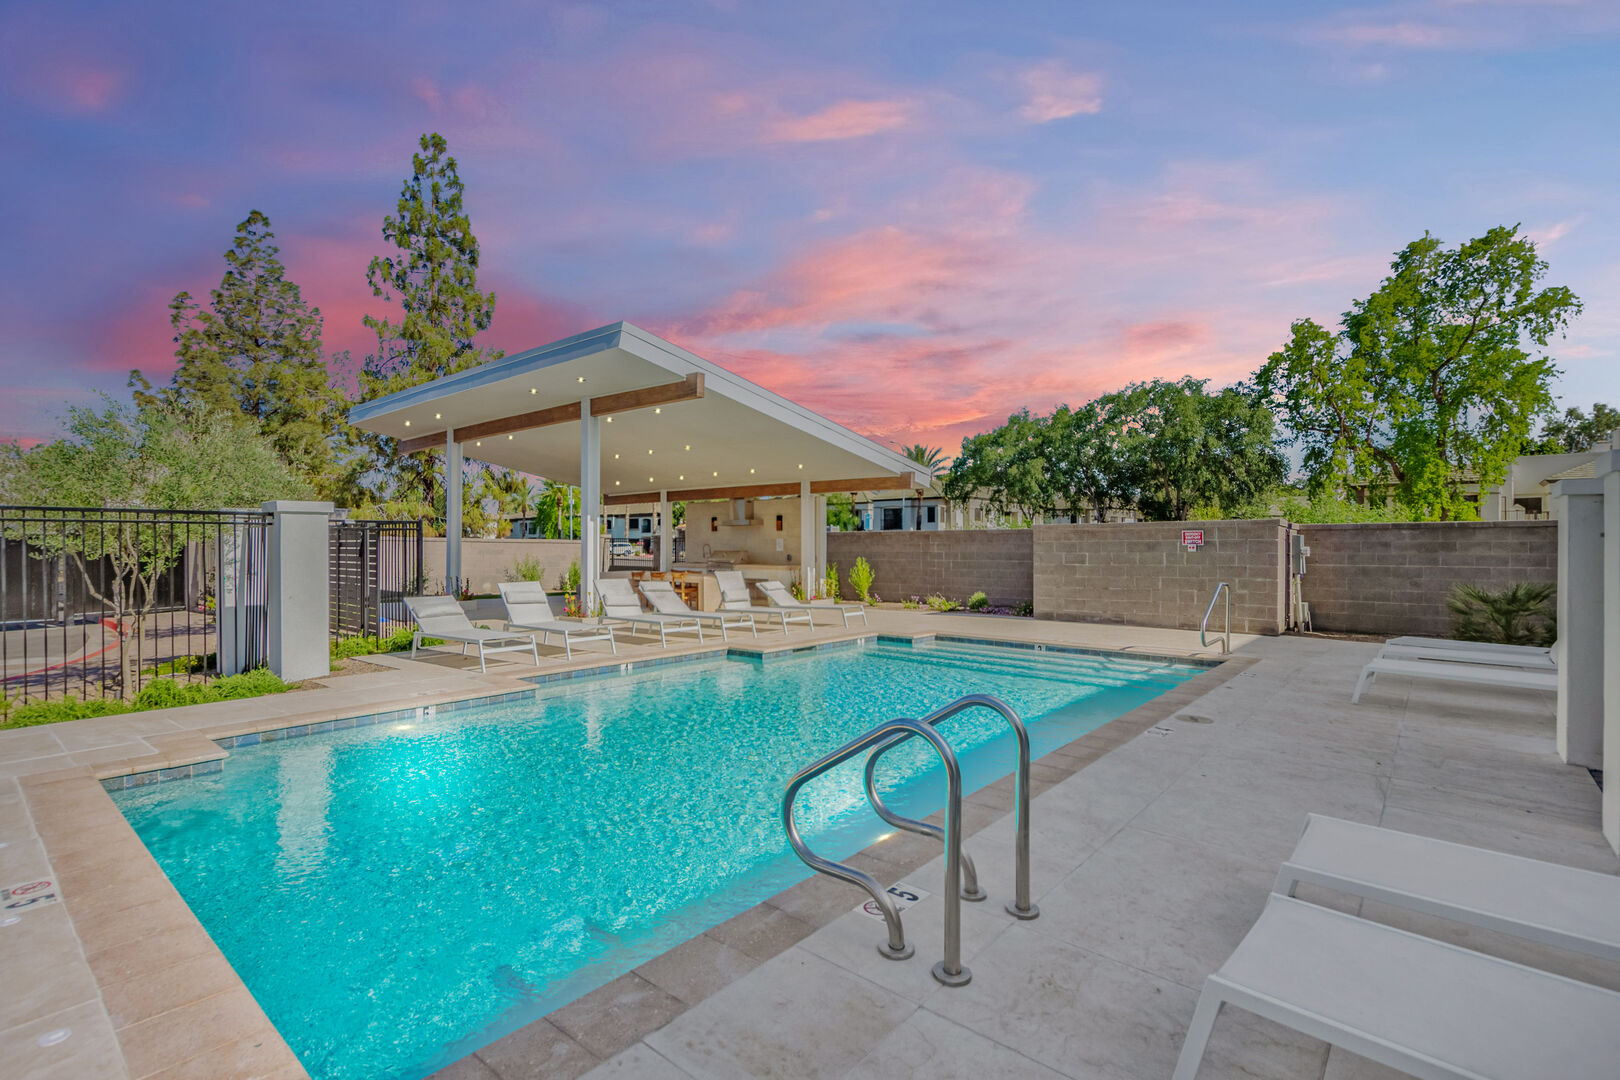 Large community pool just steps away from home!